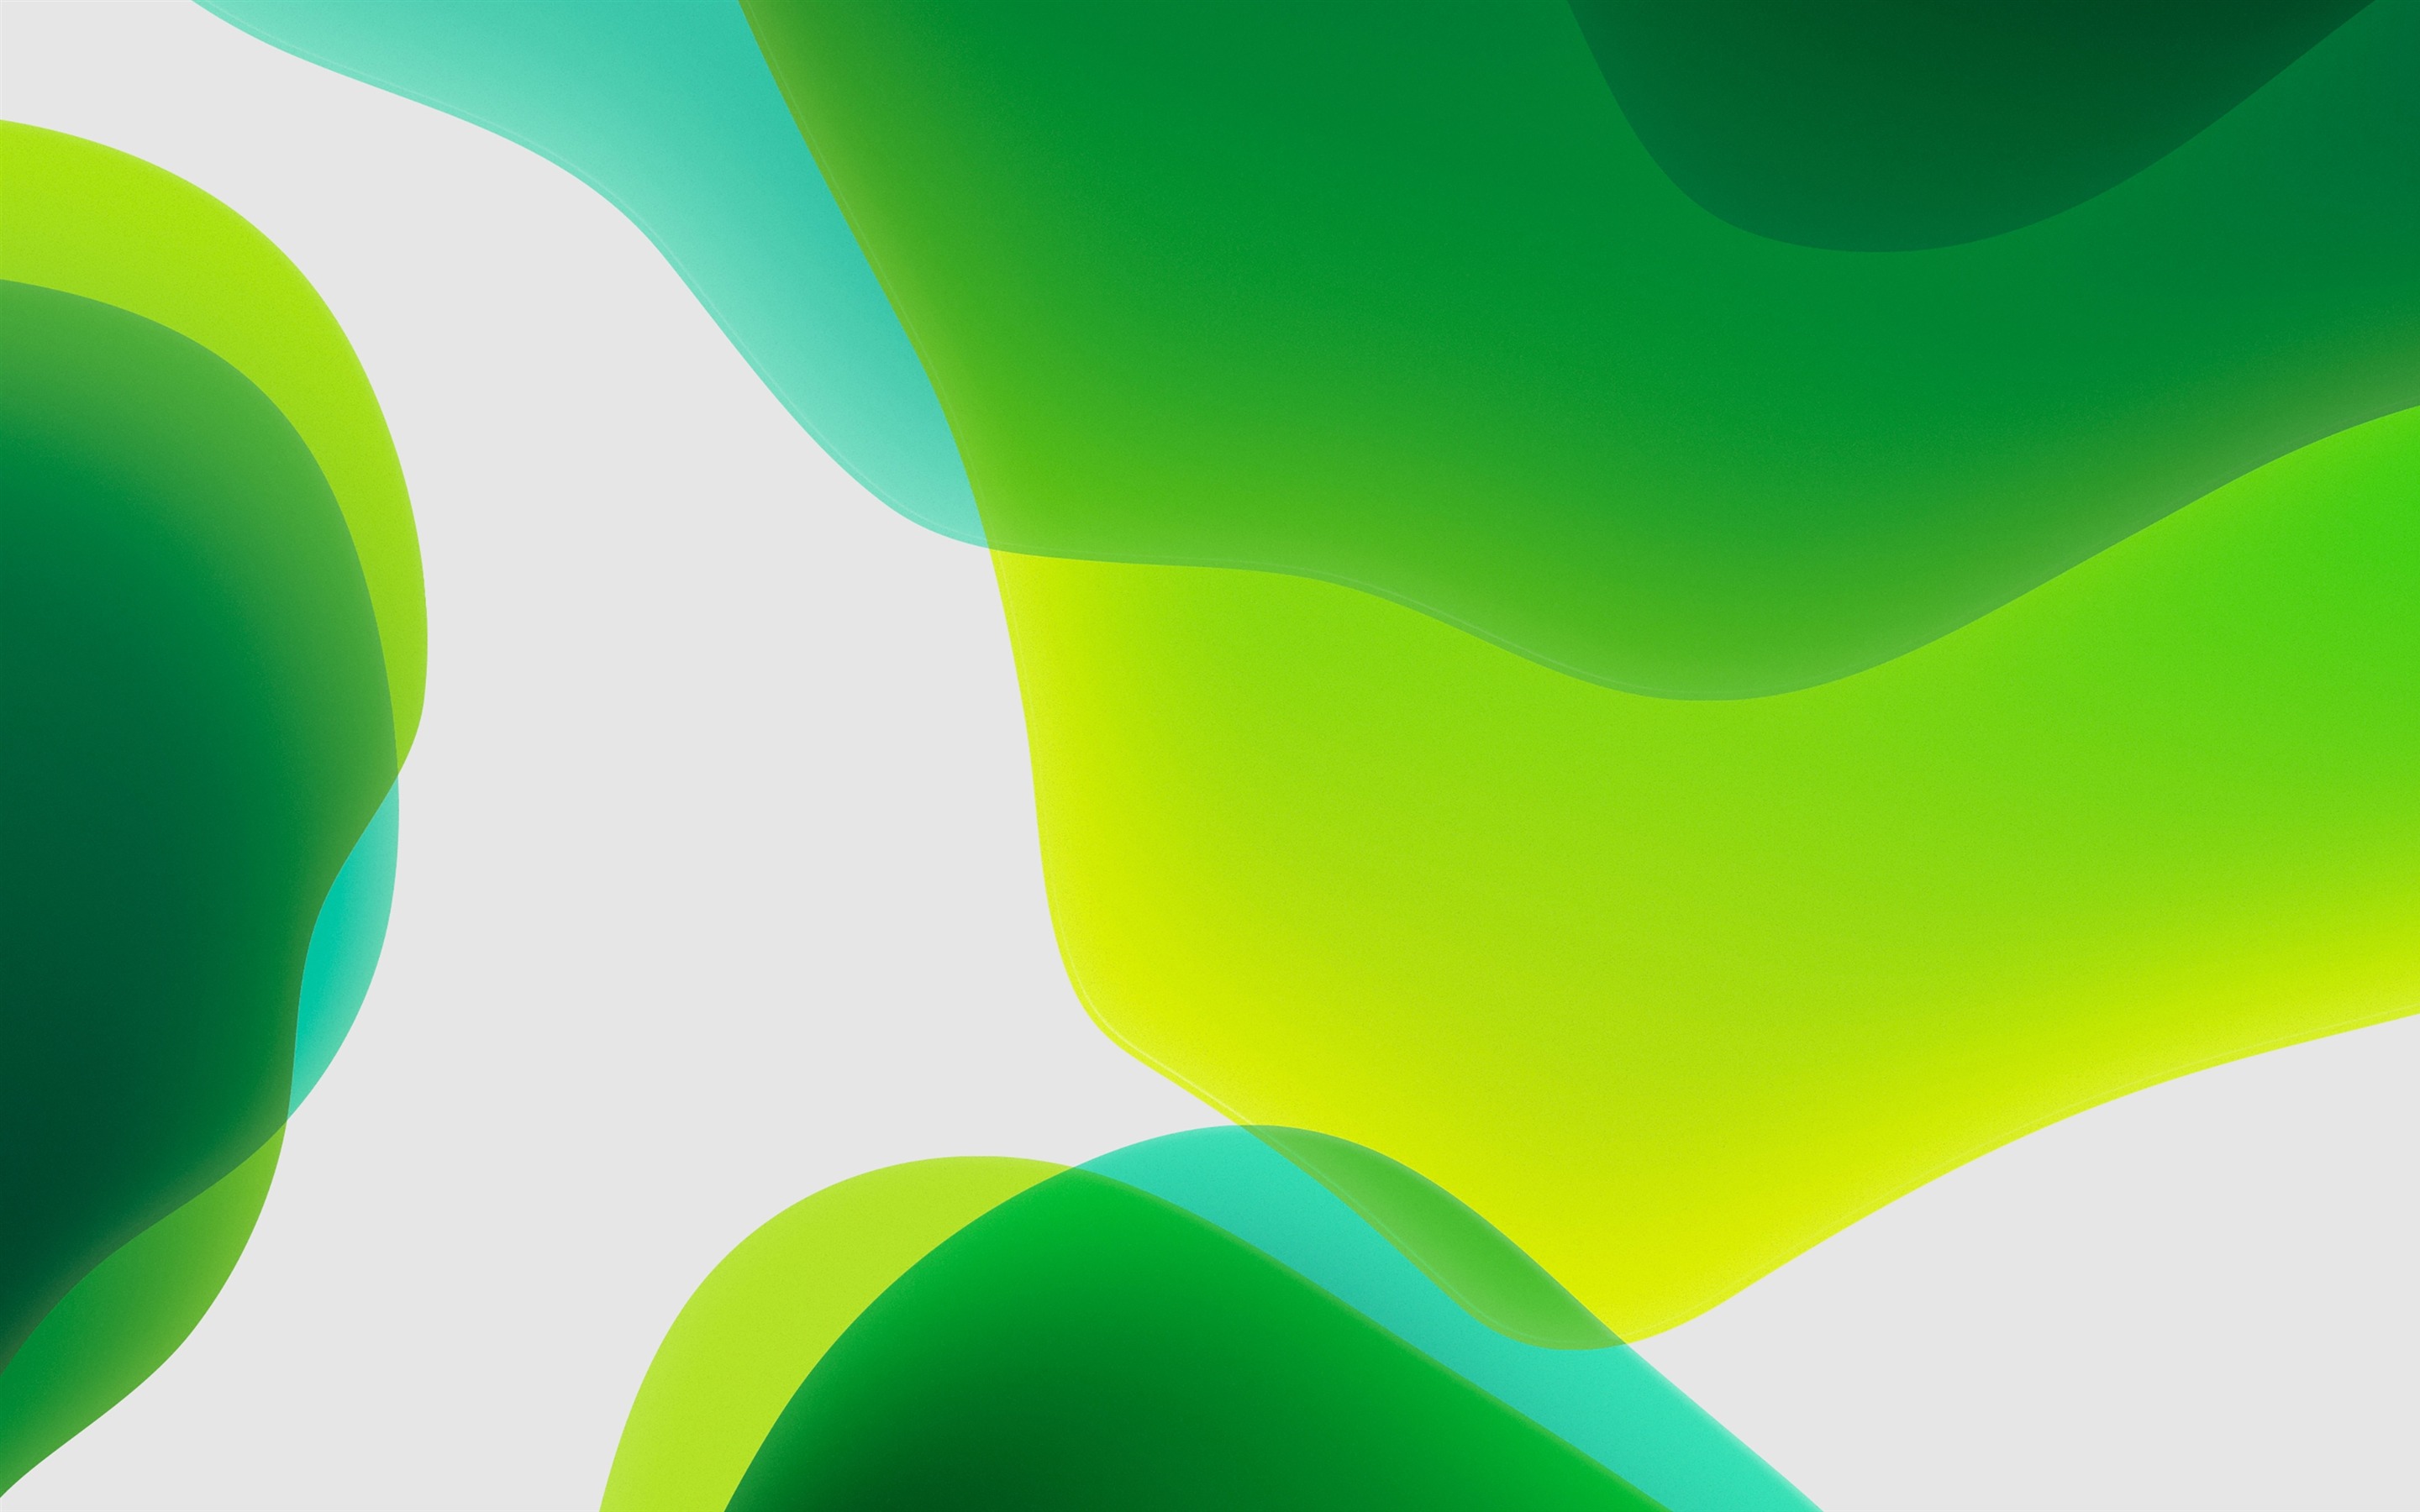 Download wallpaper green abstract waves, abstract art, abstract waves, creative, green background, green waves, geometric shapes, green gradient background for desktop with resolution 2880x1800. High Quality HD picture wallpaper